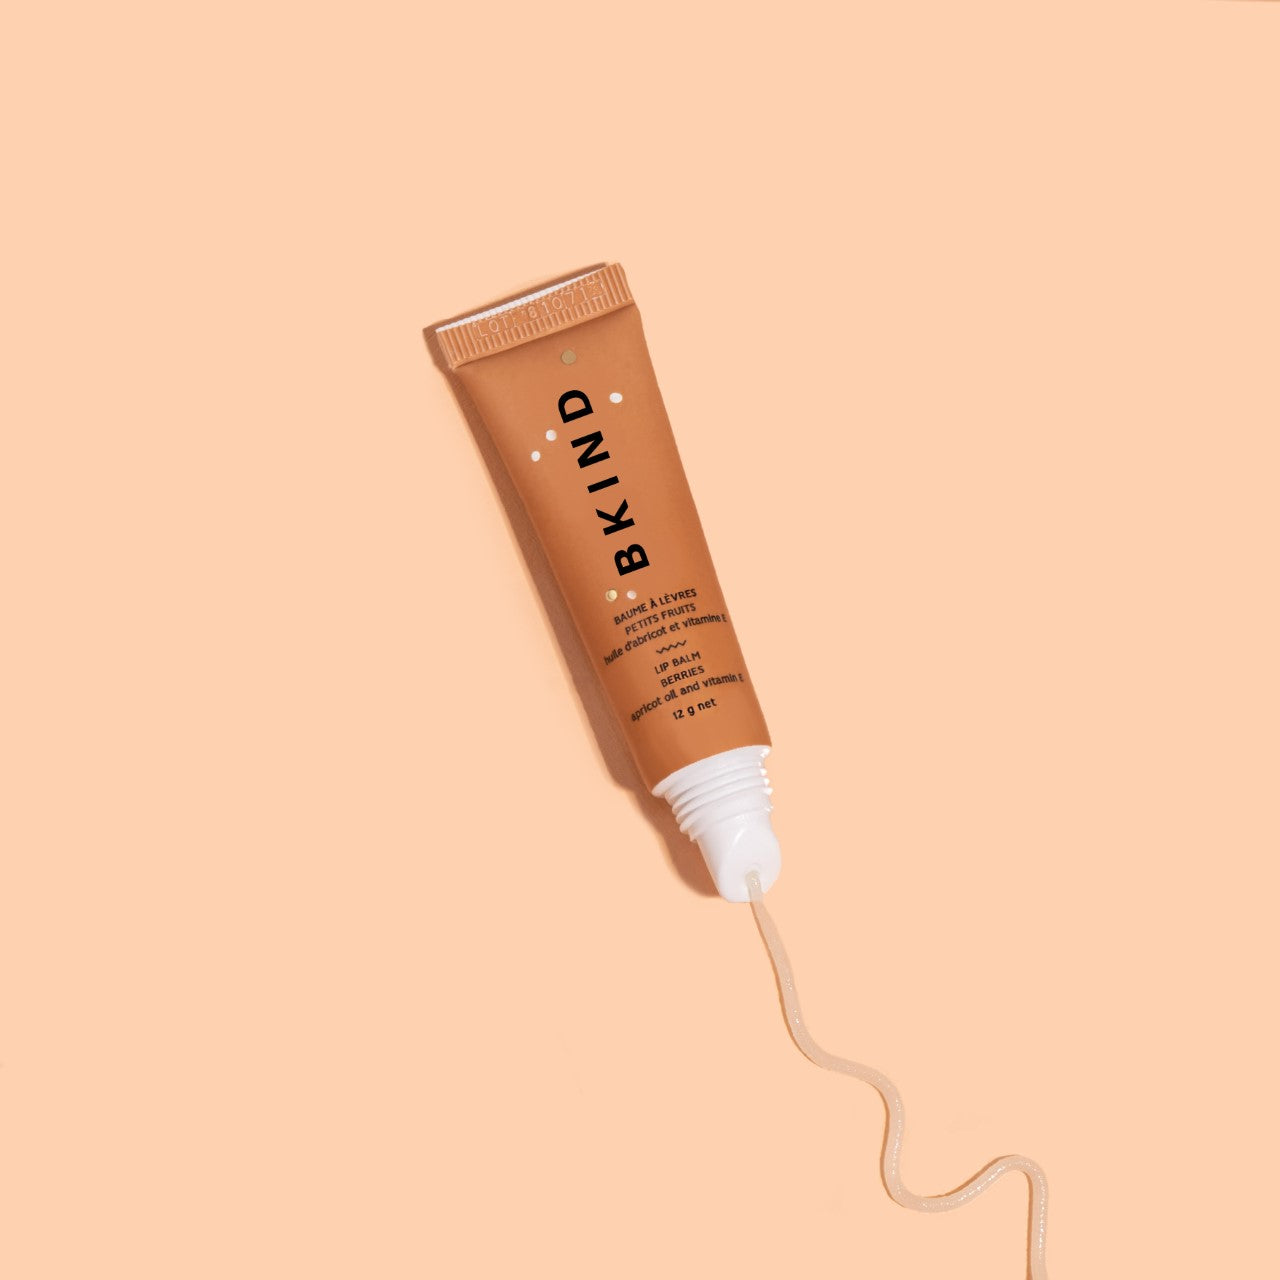 BKIND lip balm - berries - displayed with a smooth gloss of the product squeezed out onto the peach background.  The tube of orange/brown gloss is well lit with BKIND written vertically.